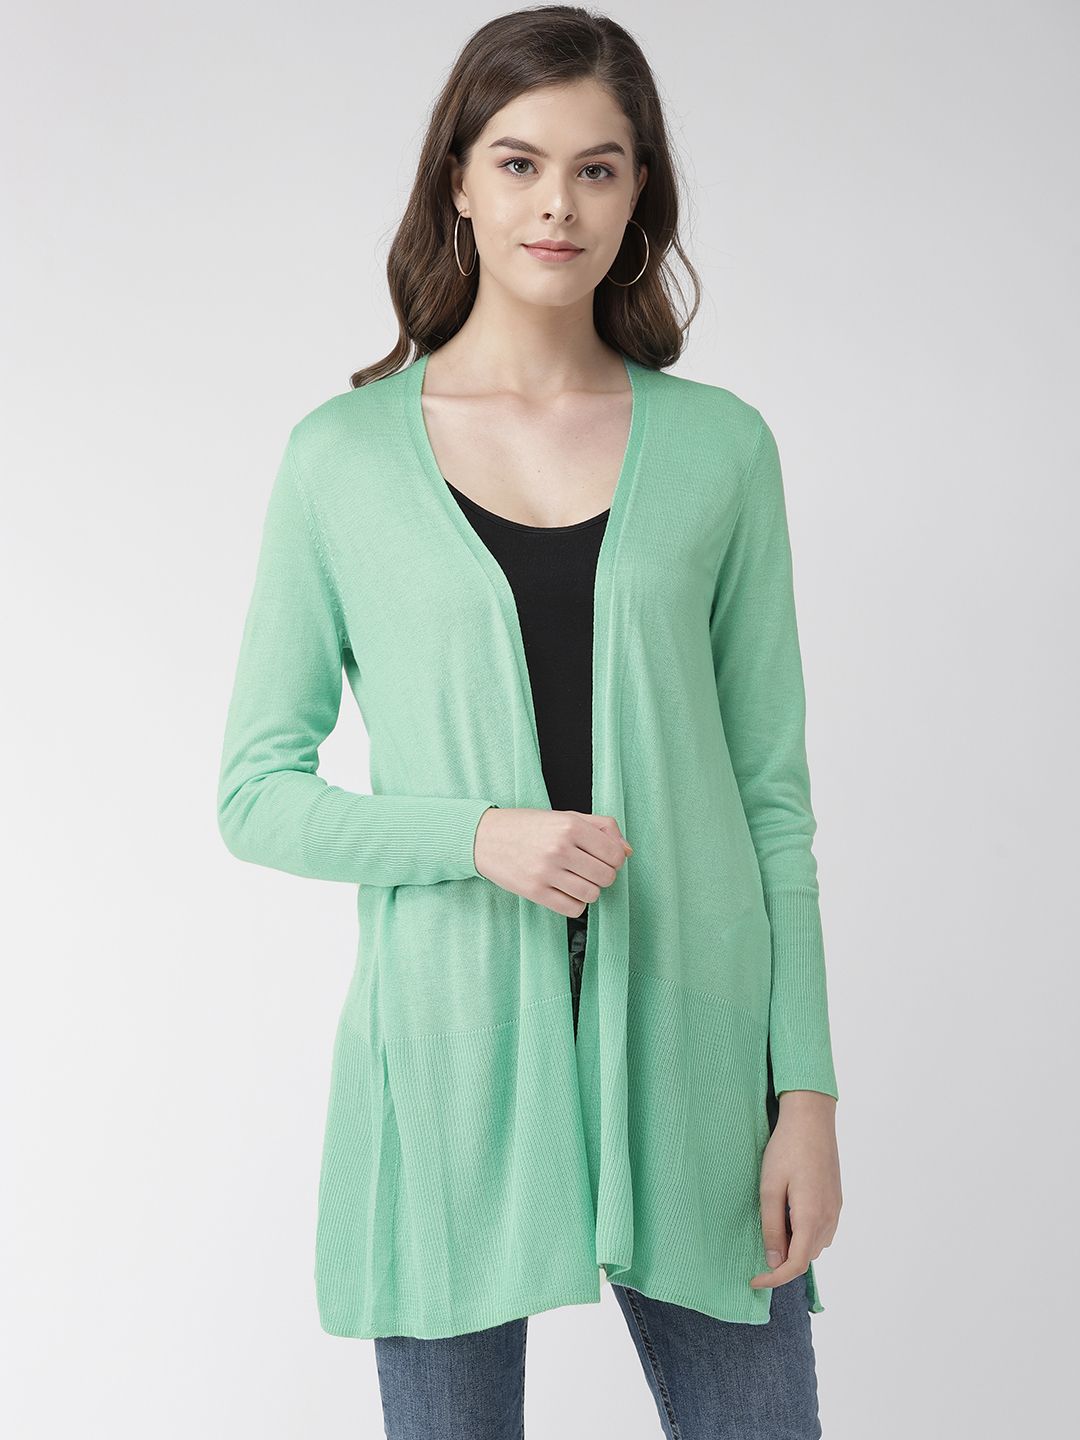 Marks & Spencer Women Green Solid Open Front Shrug Price in India